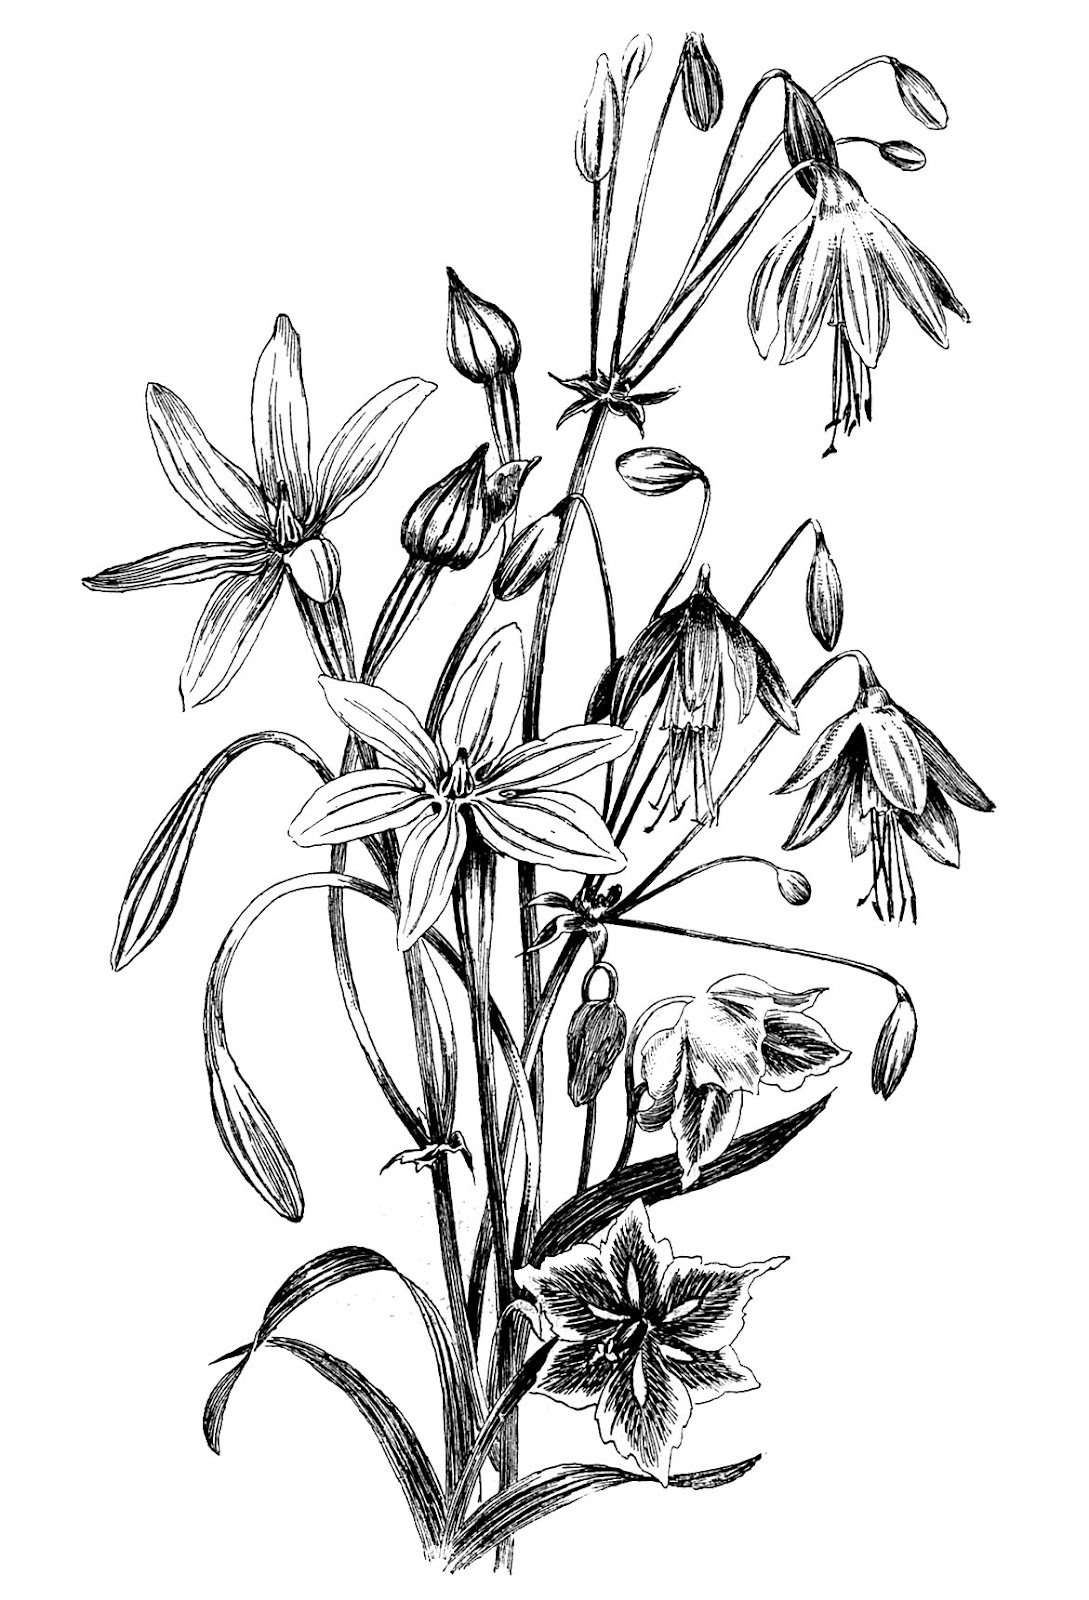 Black and White Floral Drawing - The Graphics Fairy